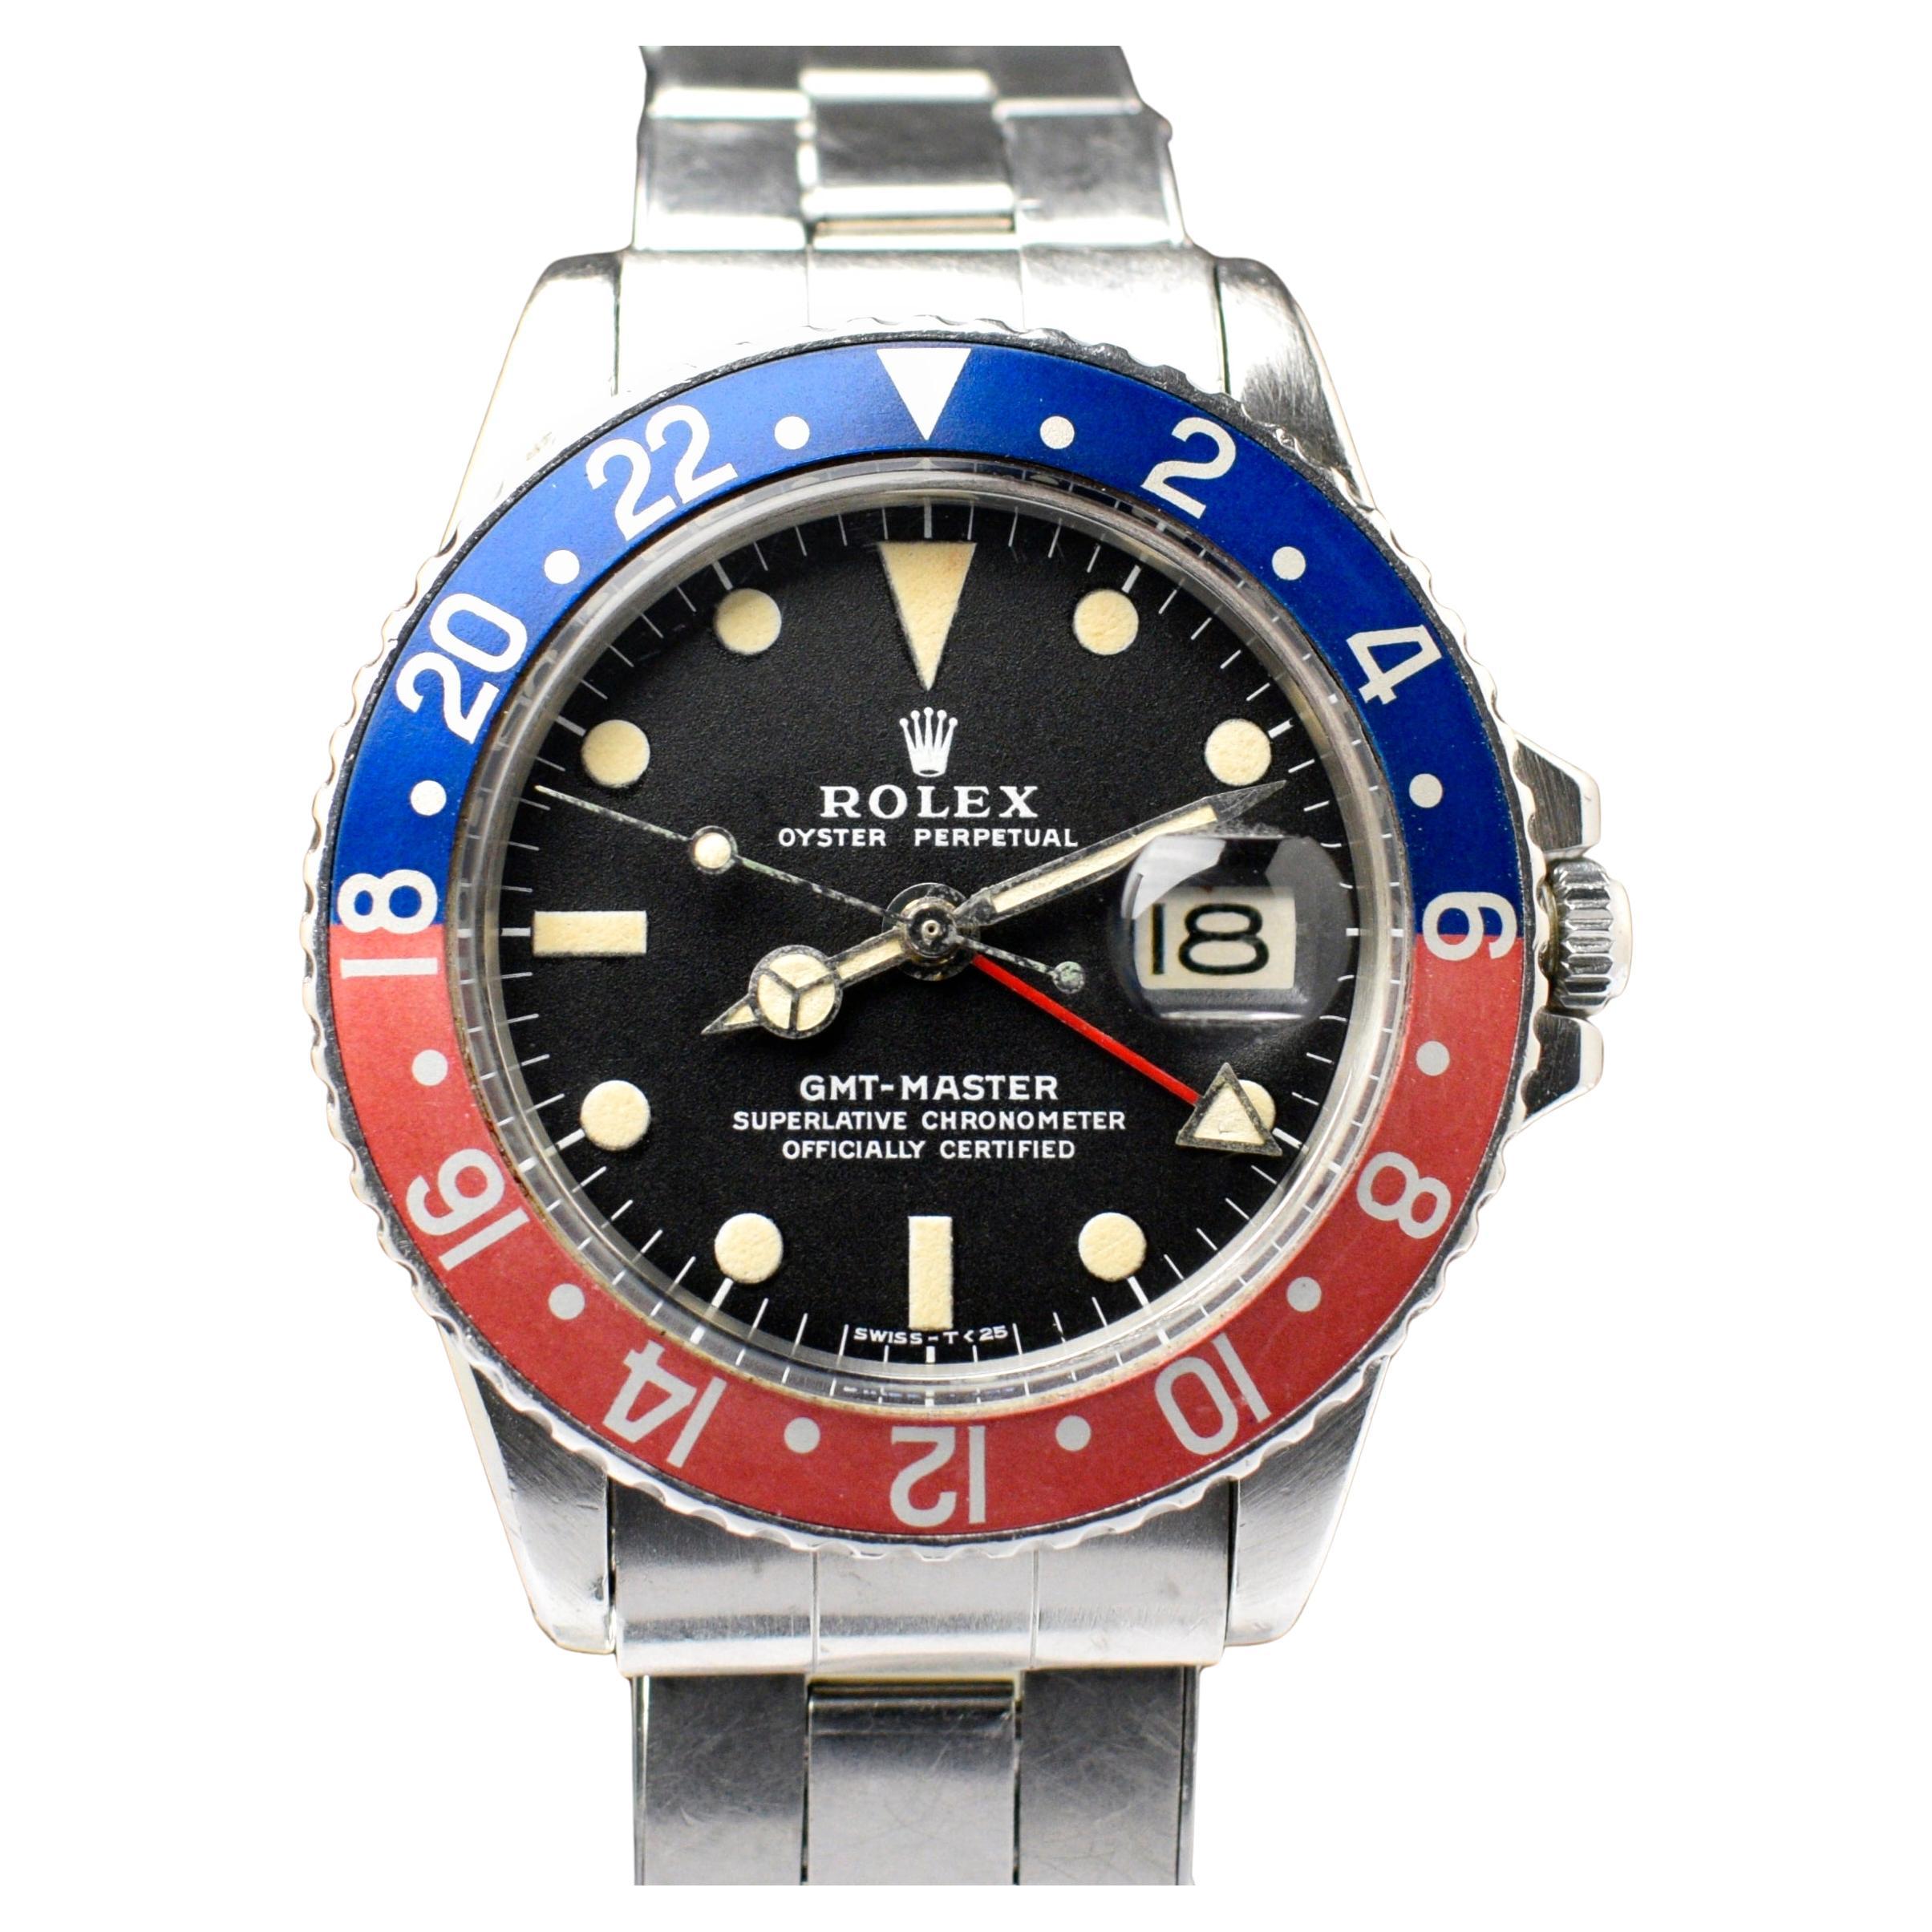 Rolex GMT-Master Pepsi Red Blue Matte Dial 1675 Steel Automatic Watch, 1971